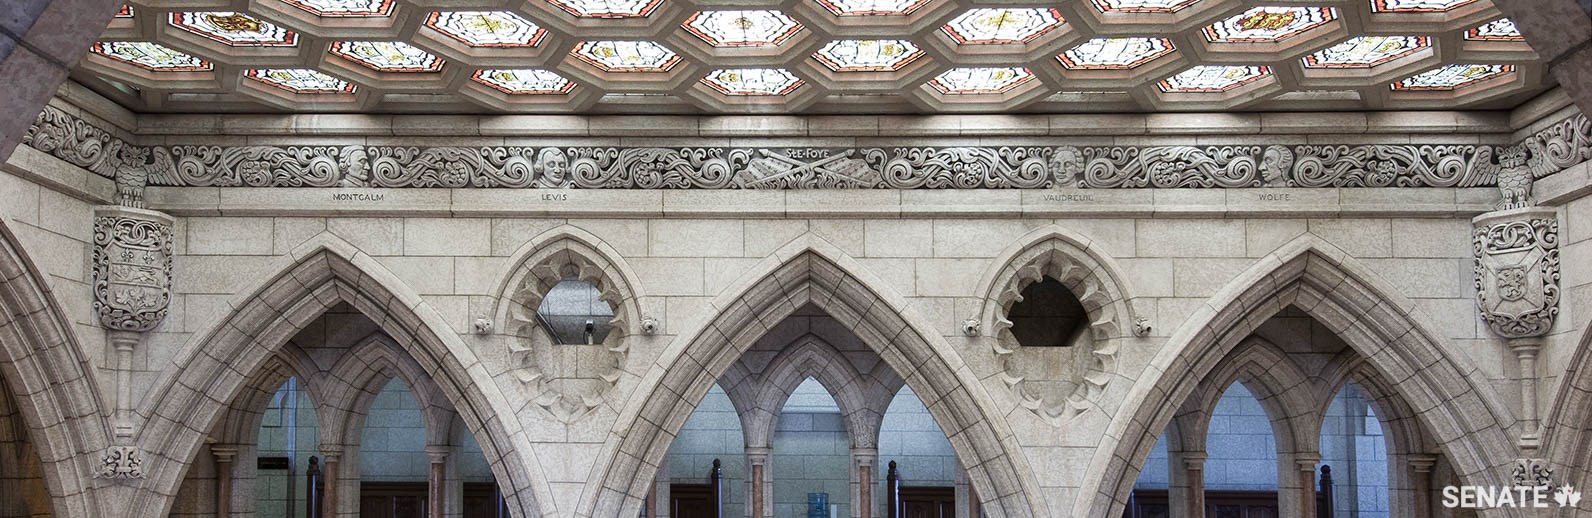 From 1957 to 1959, William Oosterhoff and his team carved this frieze high in the Senate foyer. It tells the story of Canada up to Confederation through its earliest historical figures.